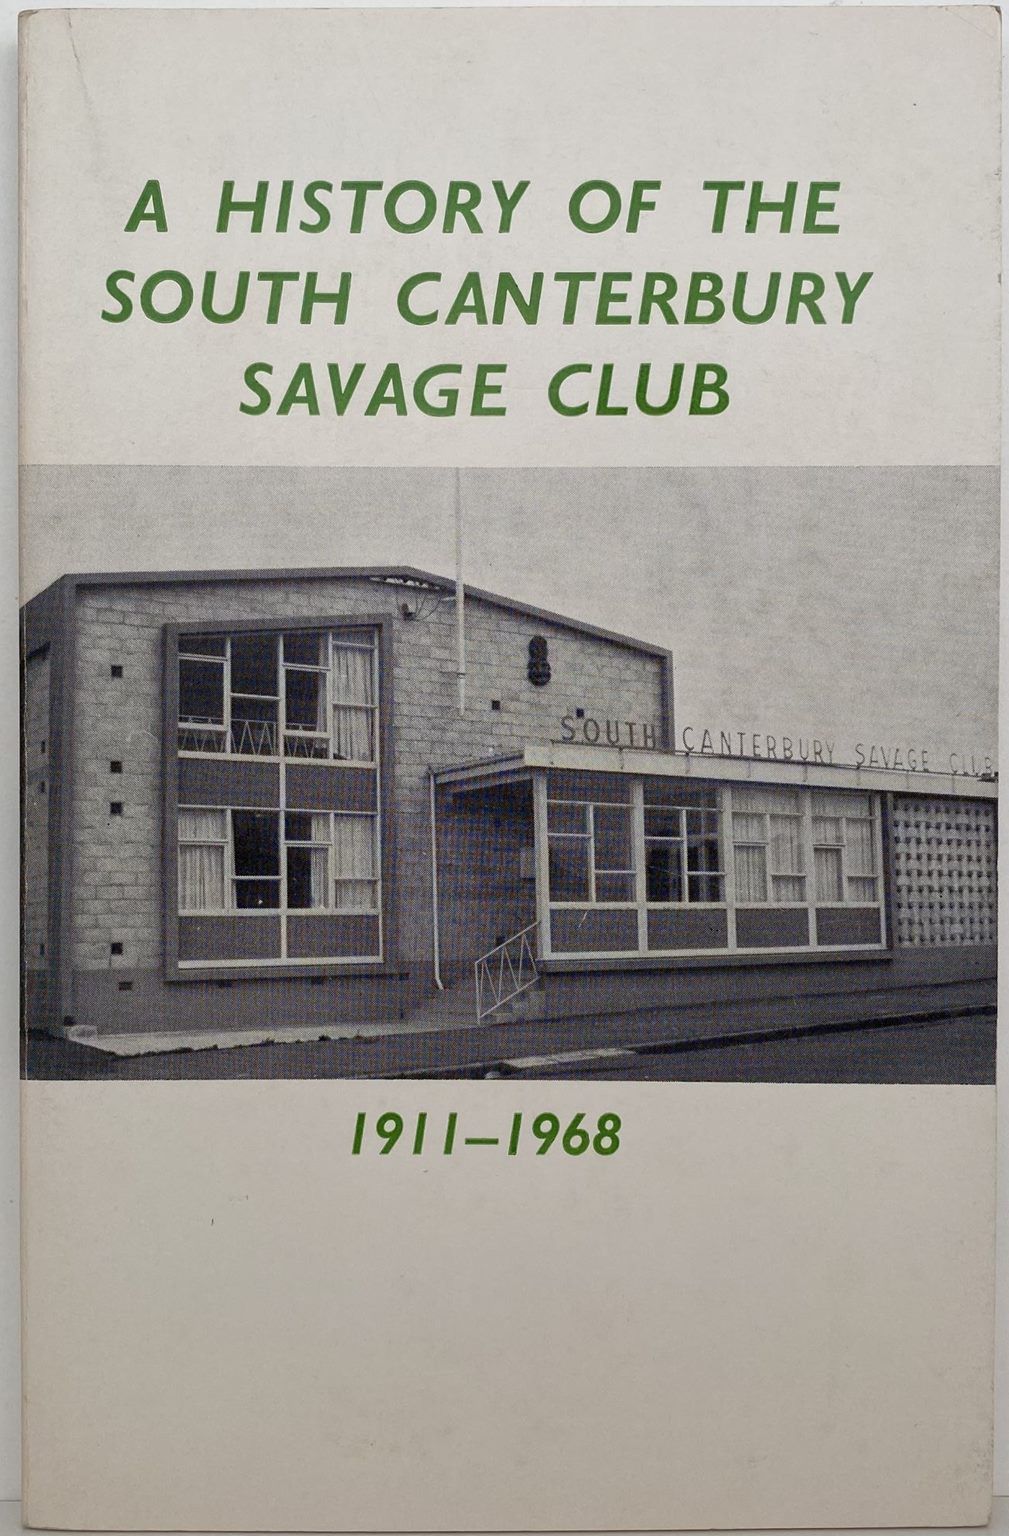 A History of the South Canterbury Savage Club 1911-1968